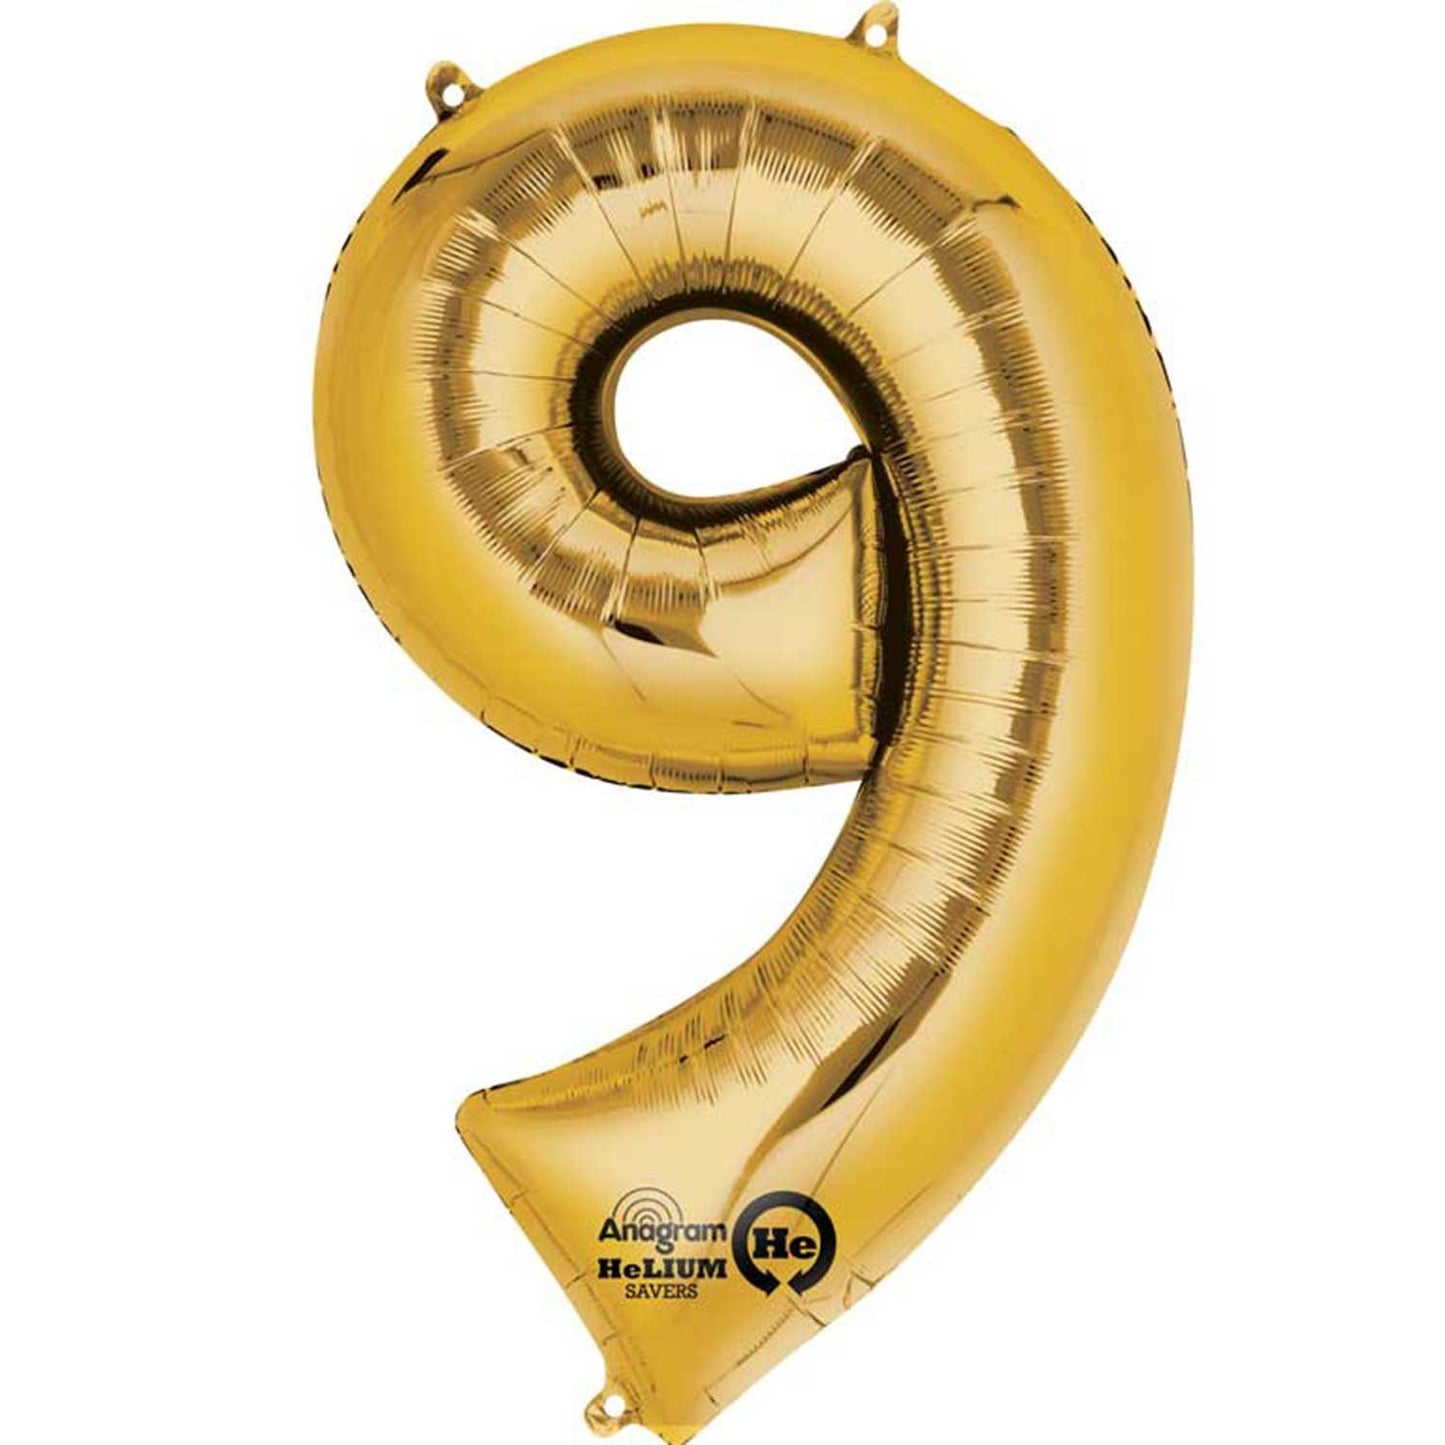 40cm (16in) Minishape Number 9 Gold Foil Balloon Air Fill, Includes straw for air inflating.